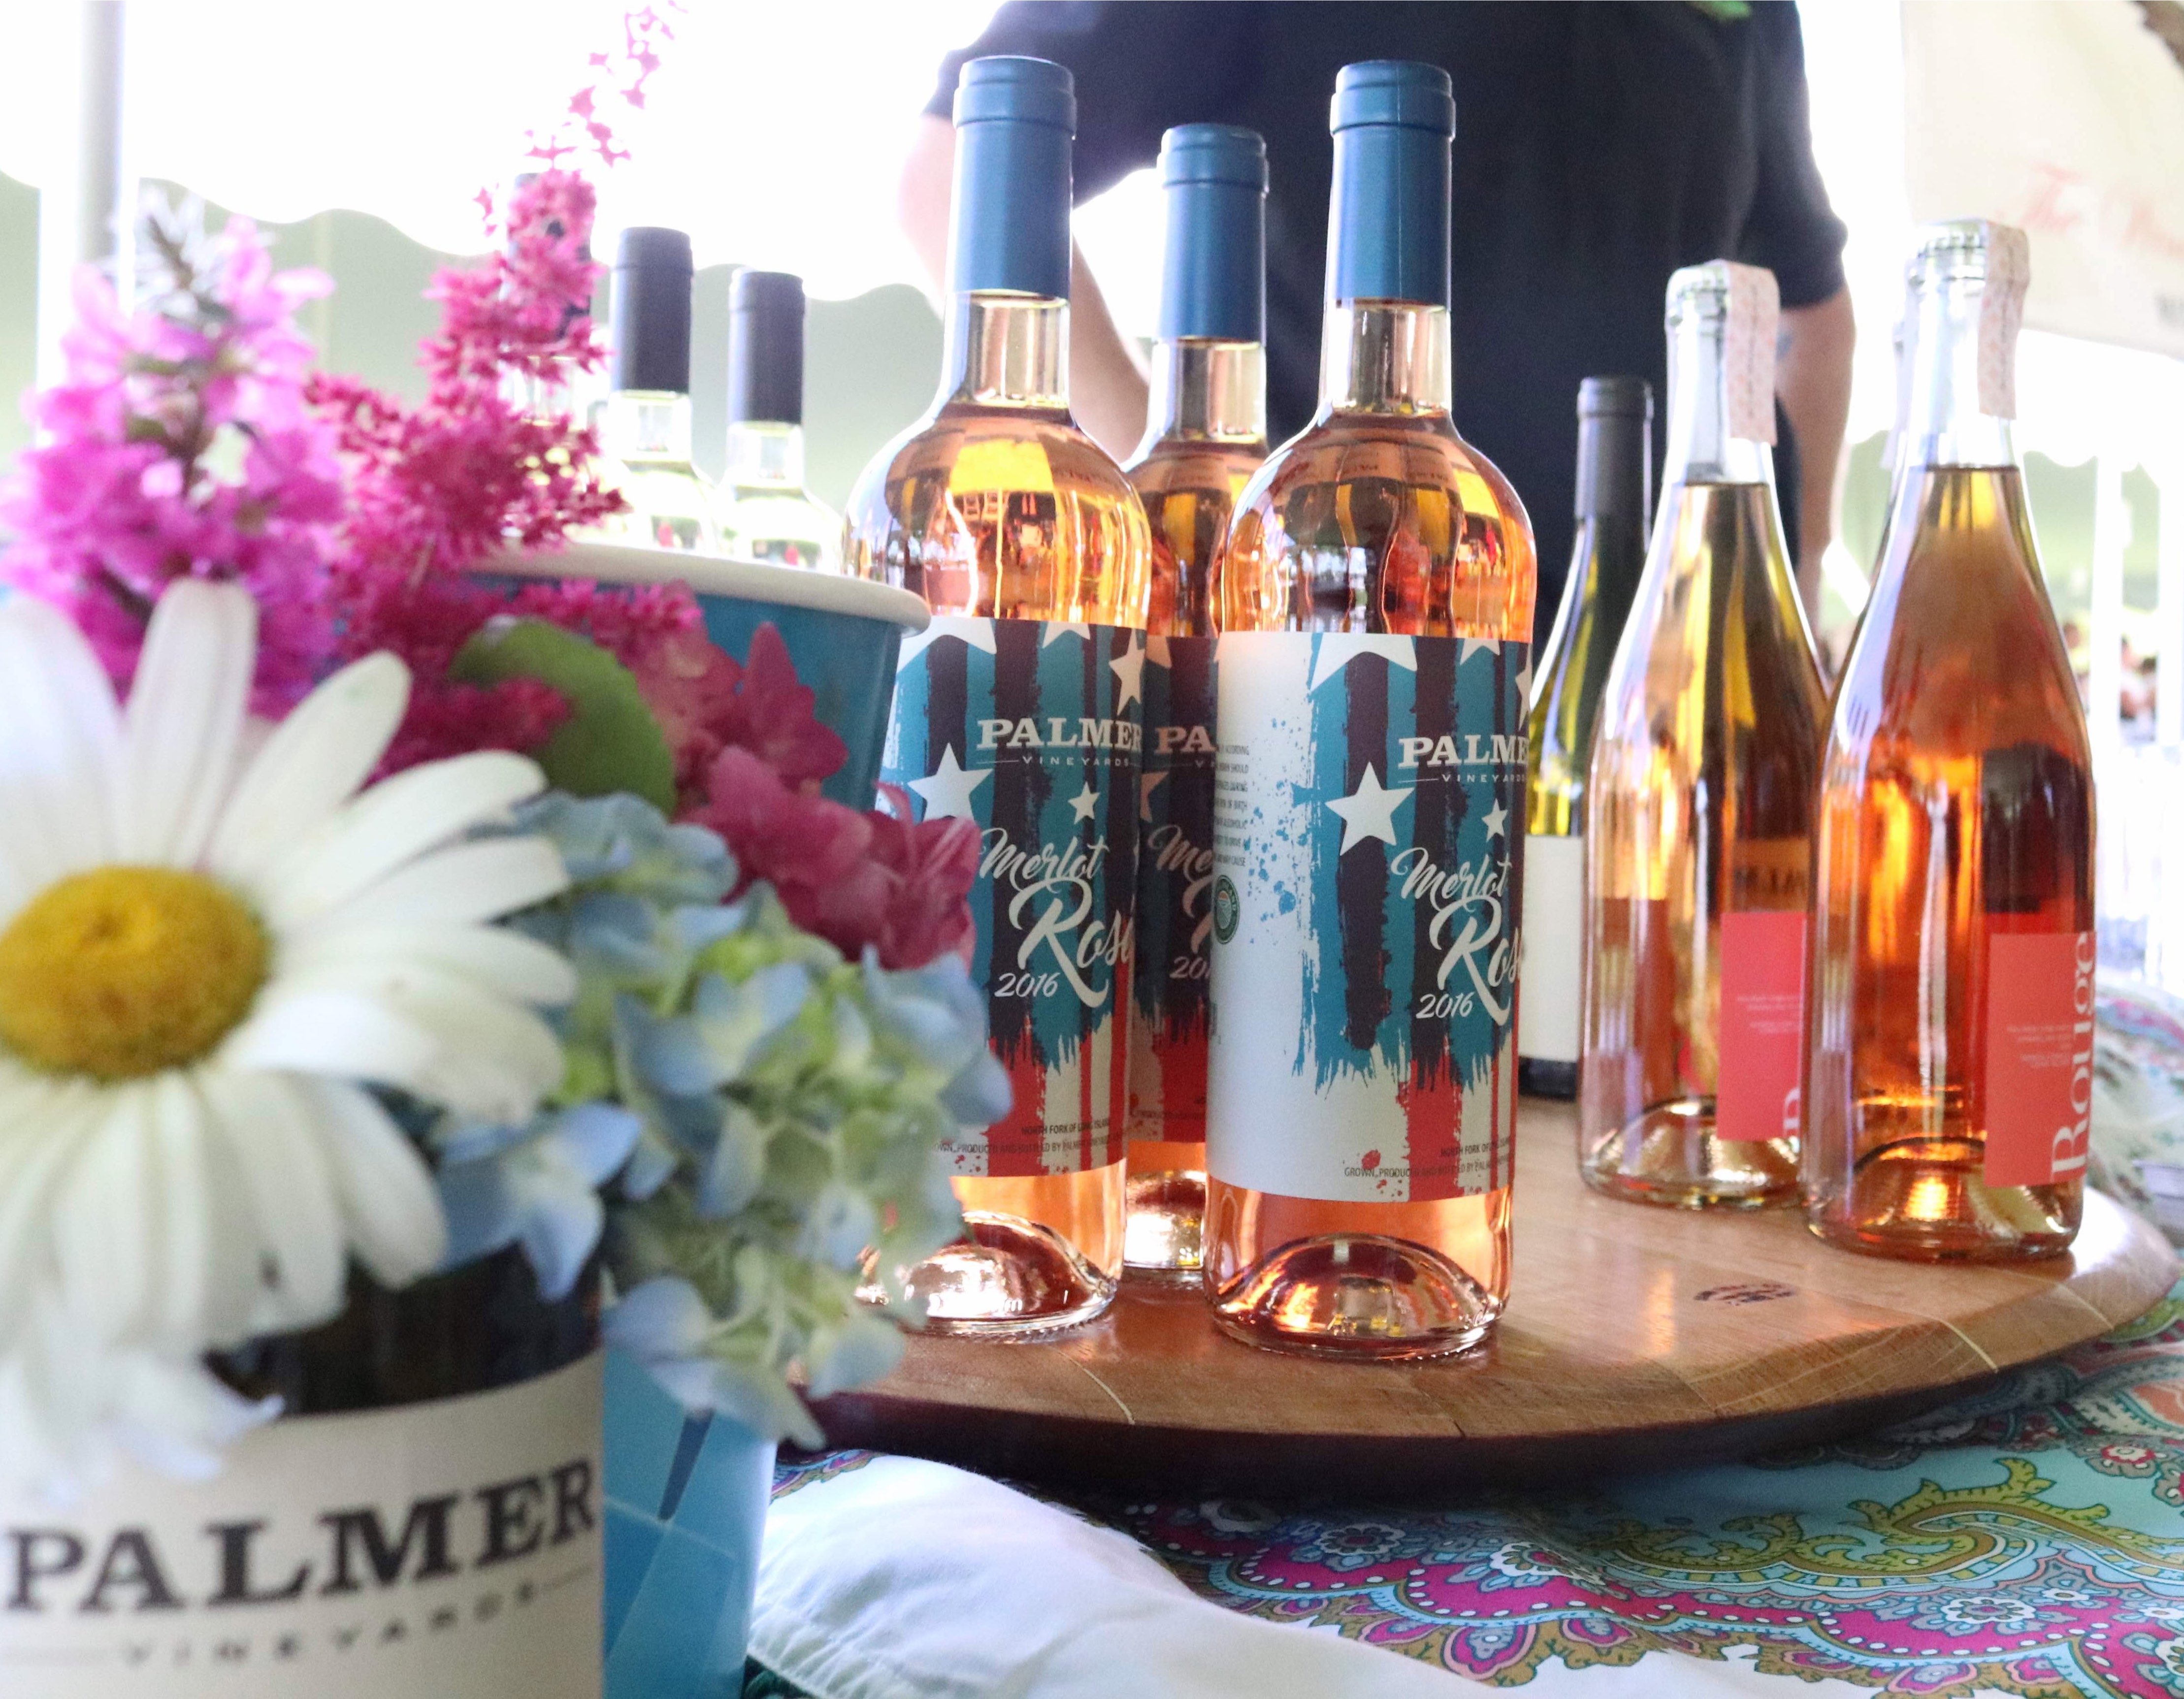 New York Wine Events hosts 2 summer events in LI Wine Country: The 4th Annual North Fork Crush returns to Jamesport Vineyards 6/23 and the Summer Rosé & Bubbly Fest comes to Palmer Vineyards 7/28.